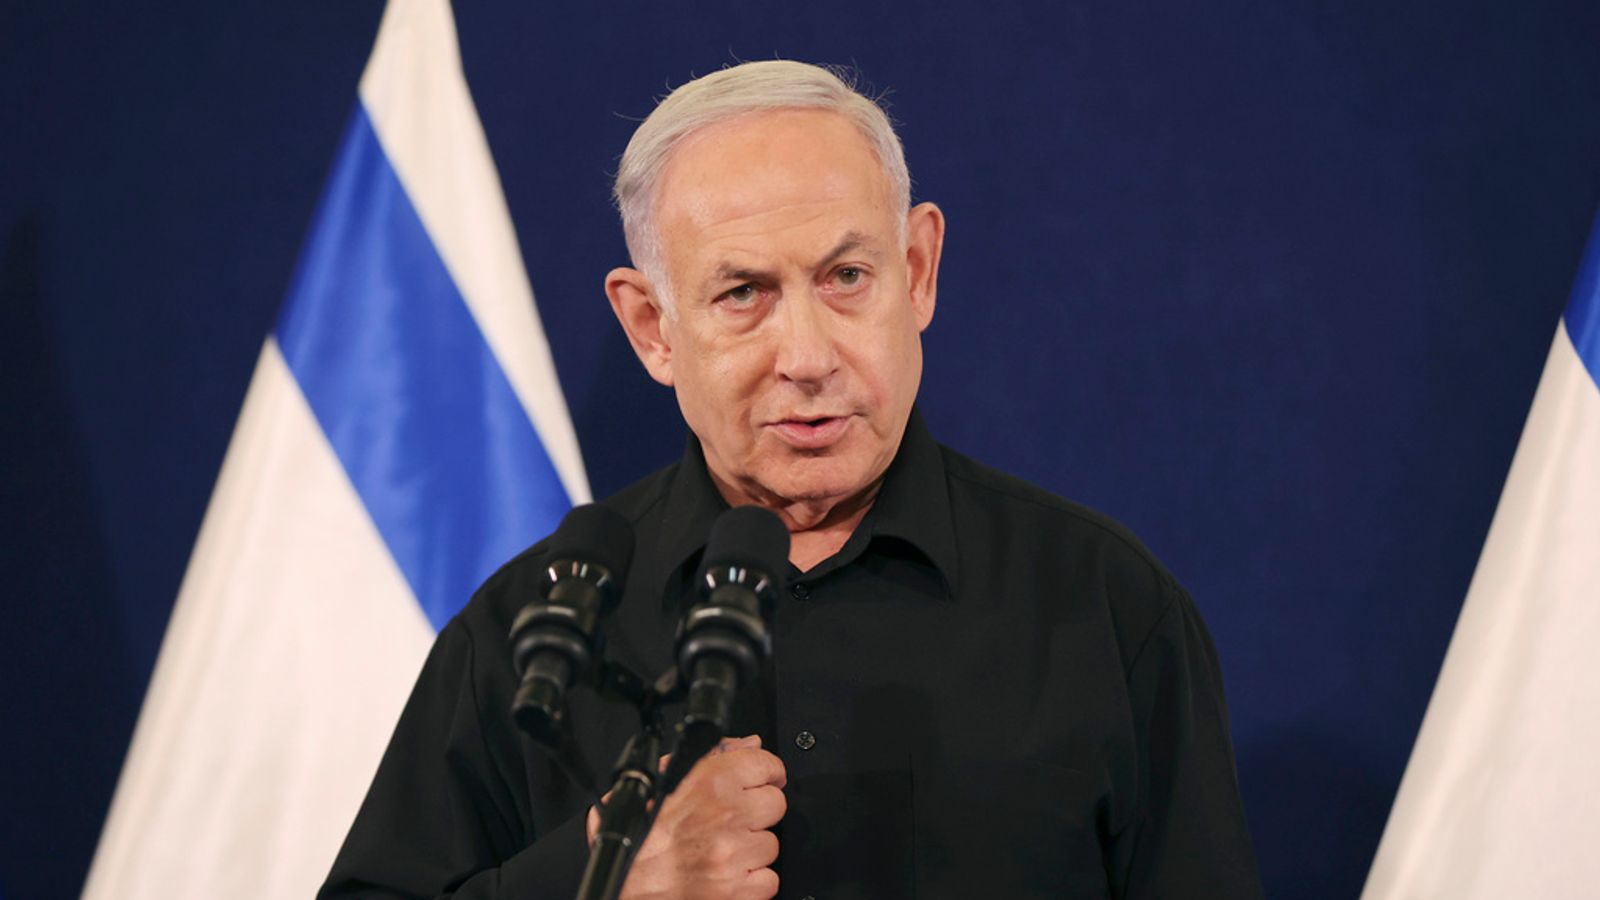 Israel will not agree to ceasefire as it would be a 'surrender to Hamas and terrorism' - Netanyahu